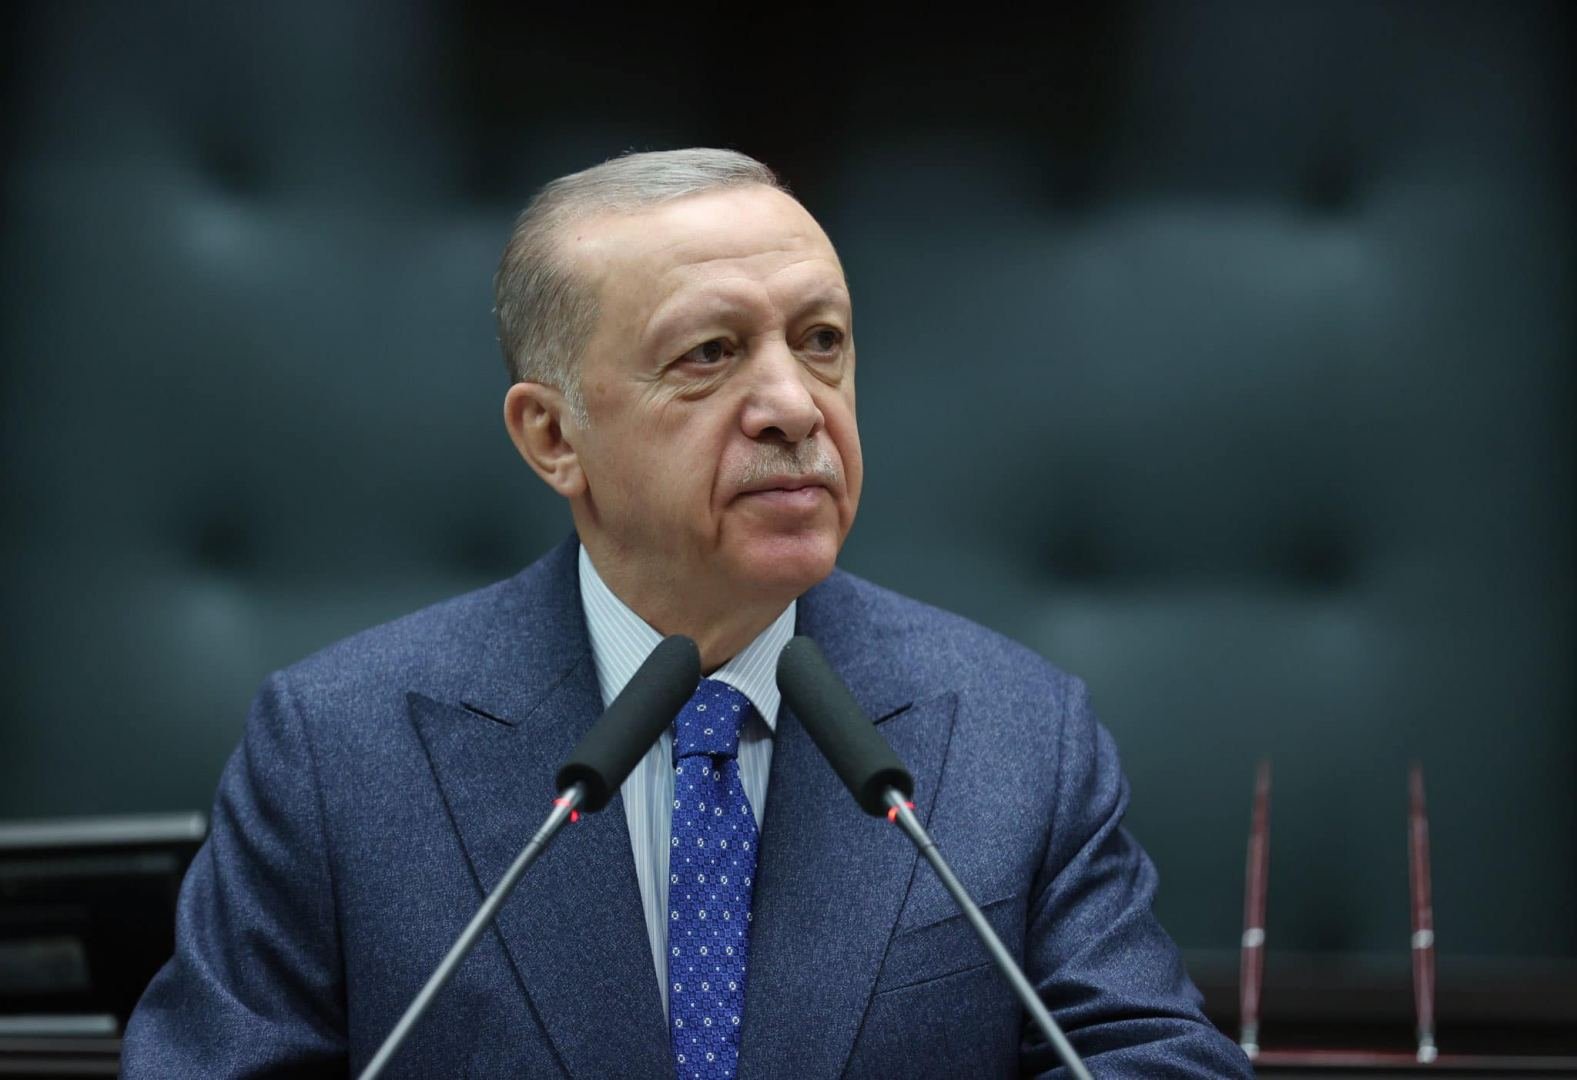 Erdoğan says world expects US to stop Israel